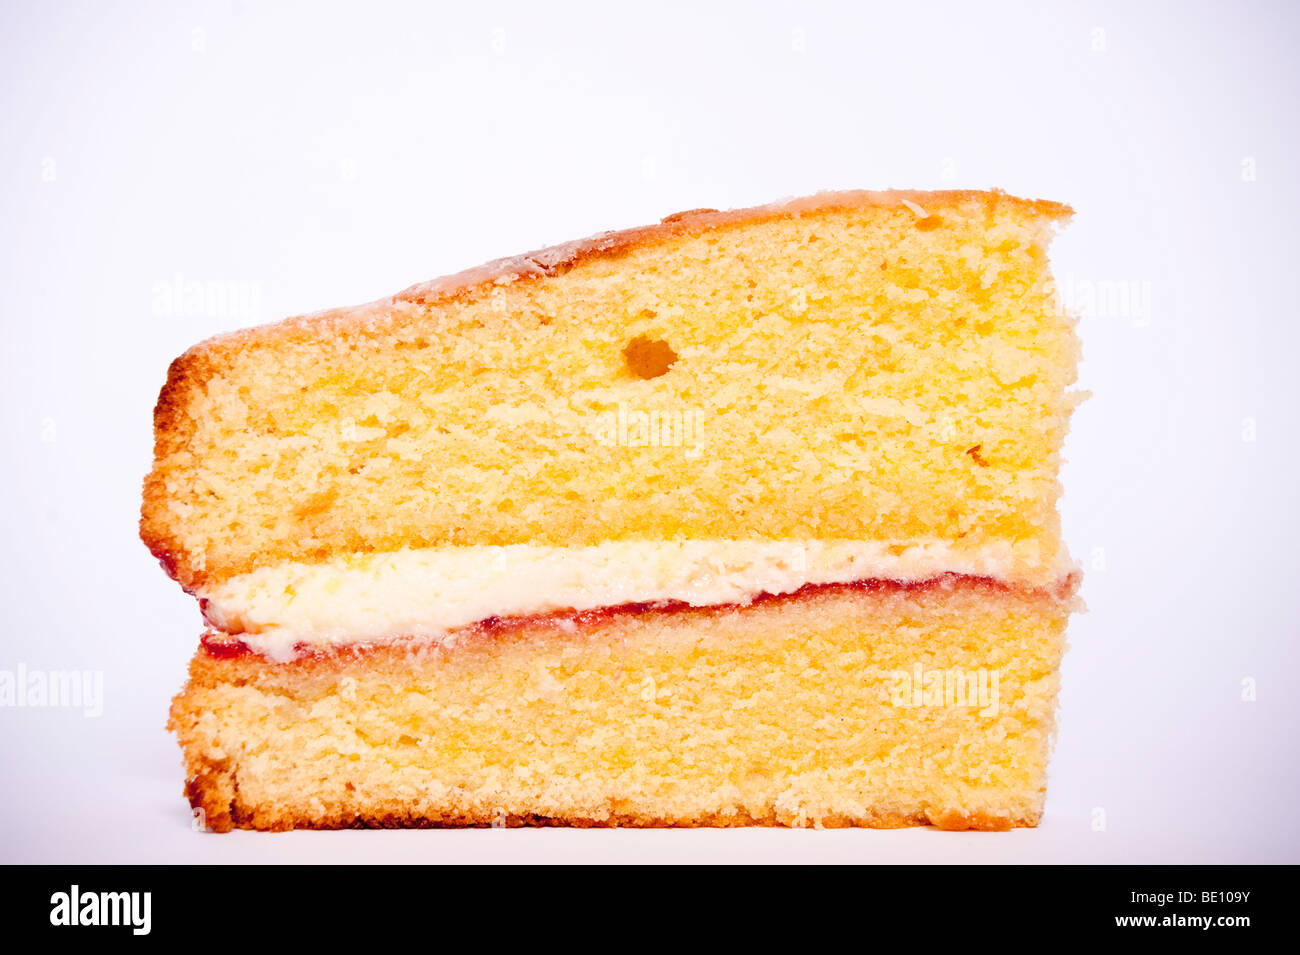 A close up of a slice of victoria sponge cake on a white background Stock Photo